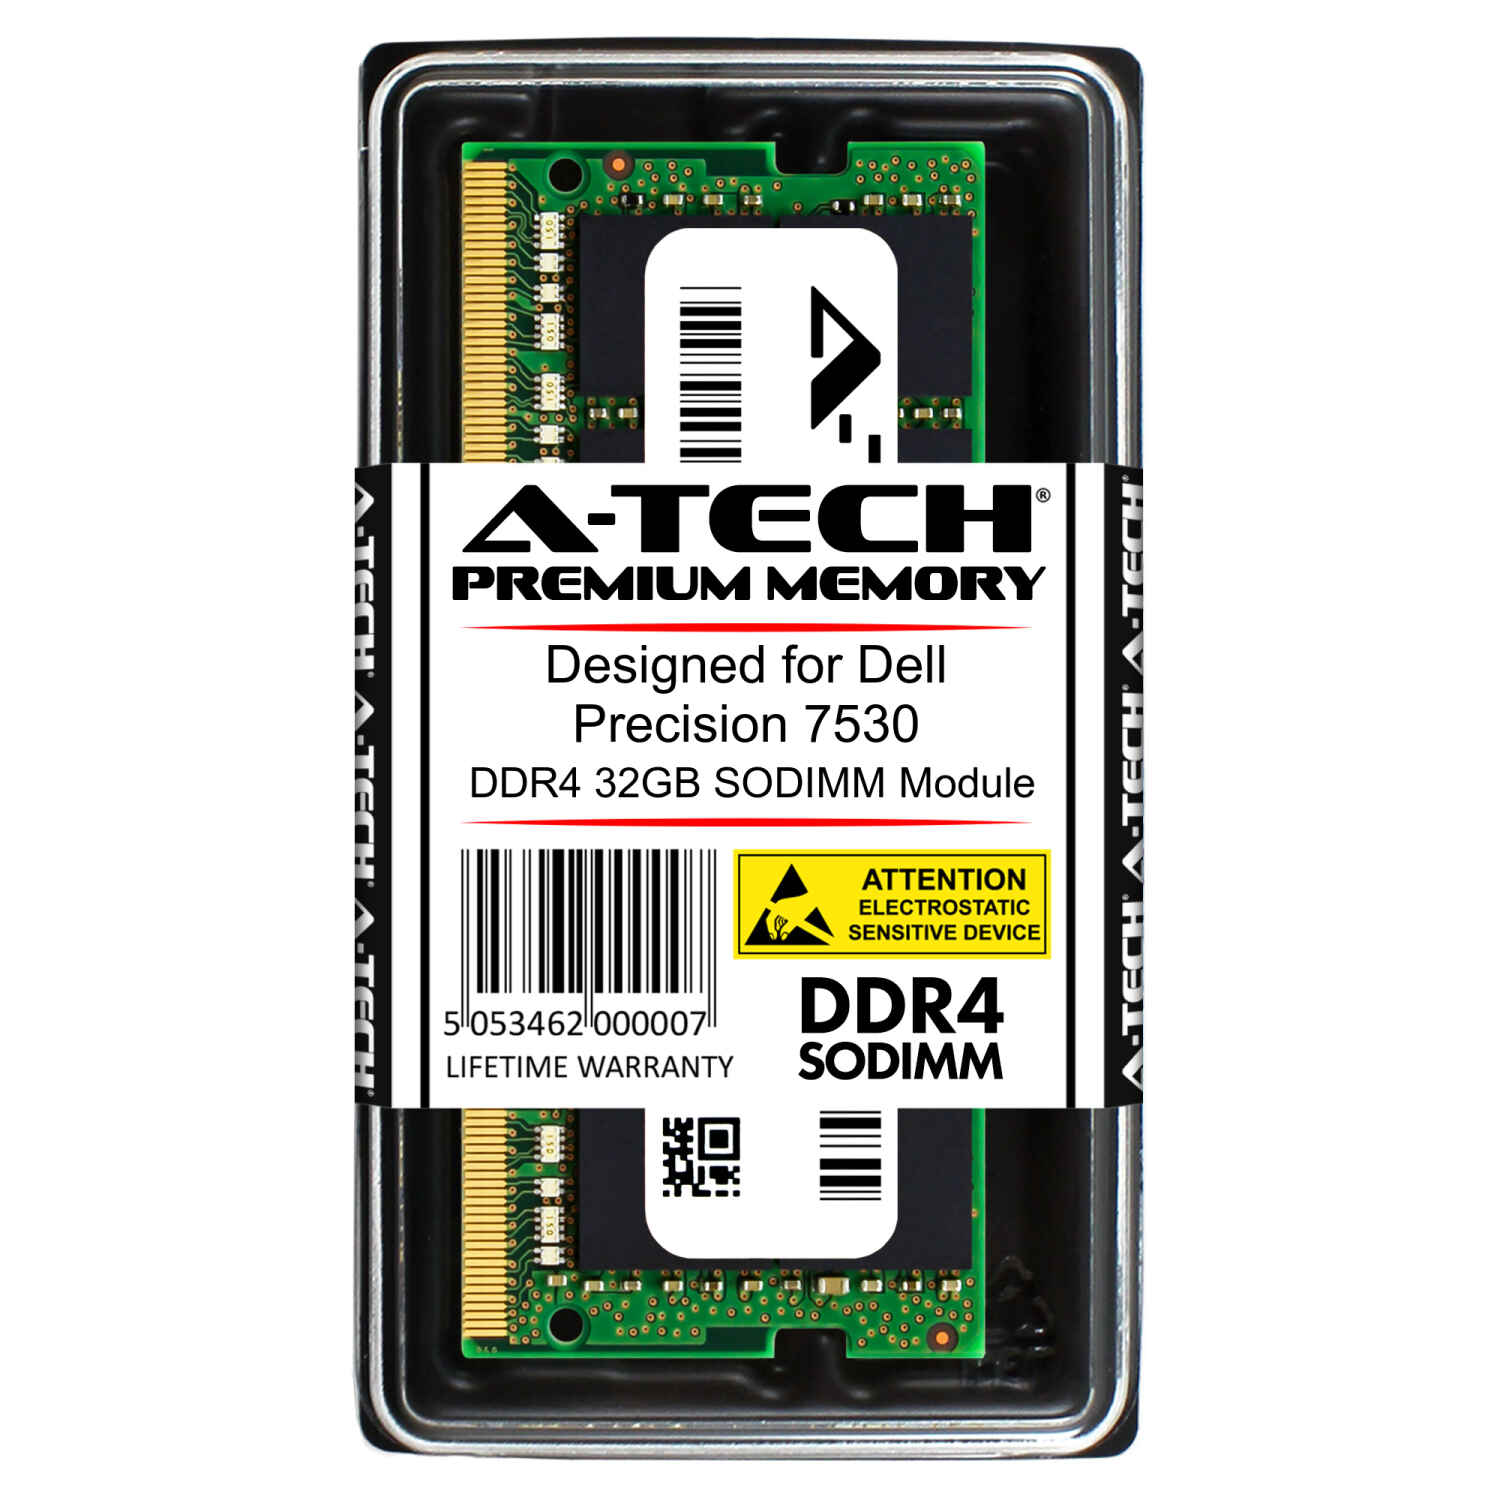 Details about A-Tech 32GB RAM for DELL Precision 7530 DDR4 2666MHz SODIMM  PC4-21300 Memory